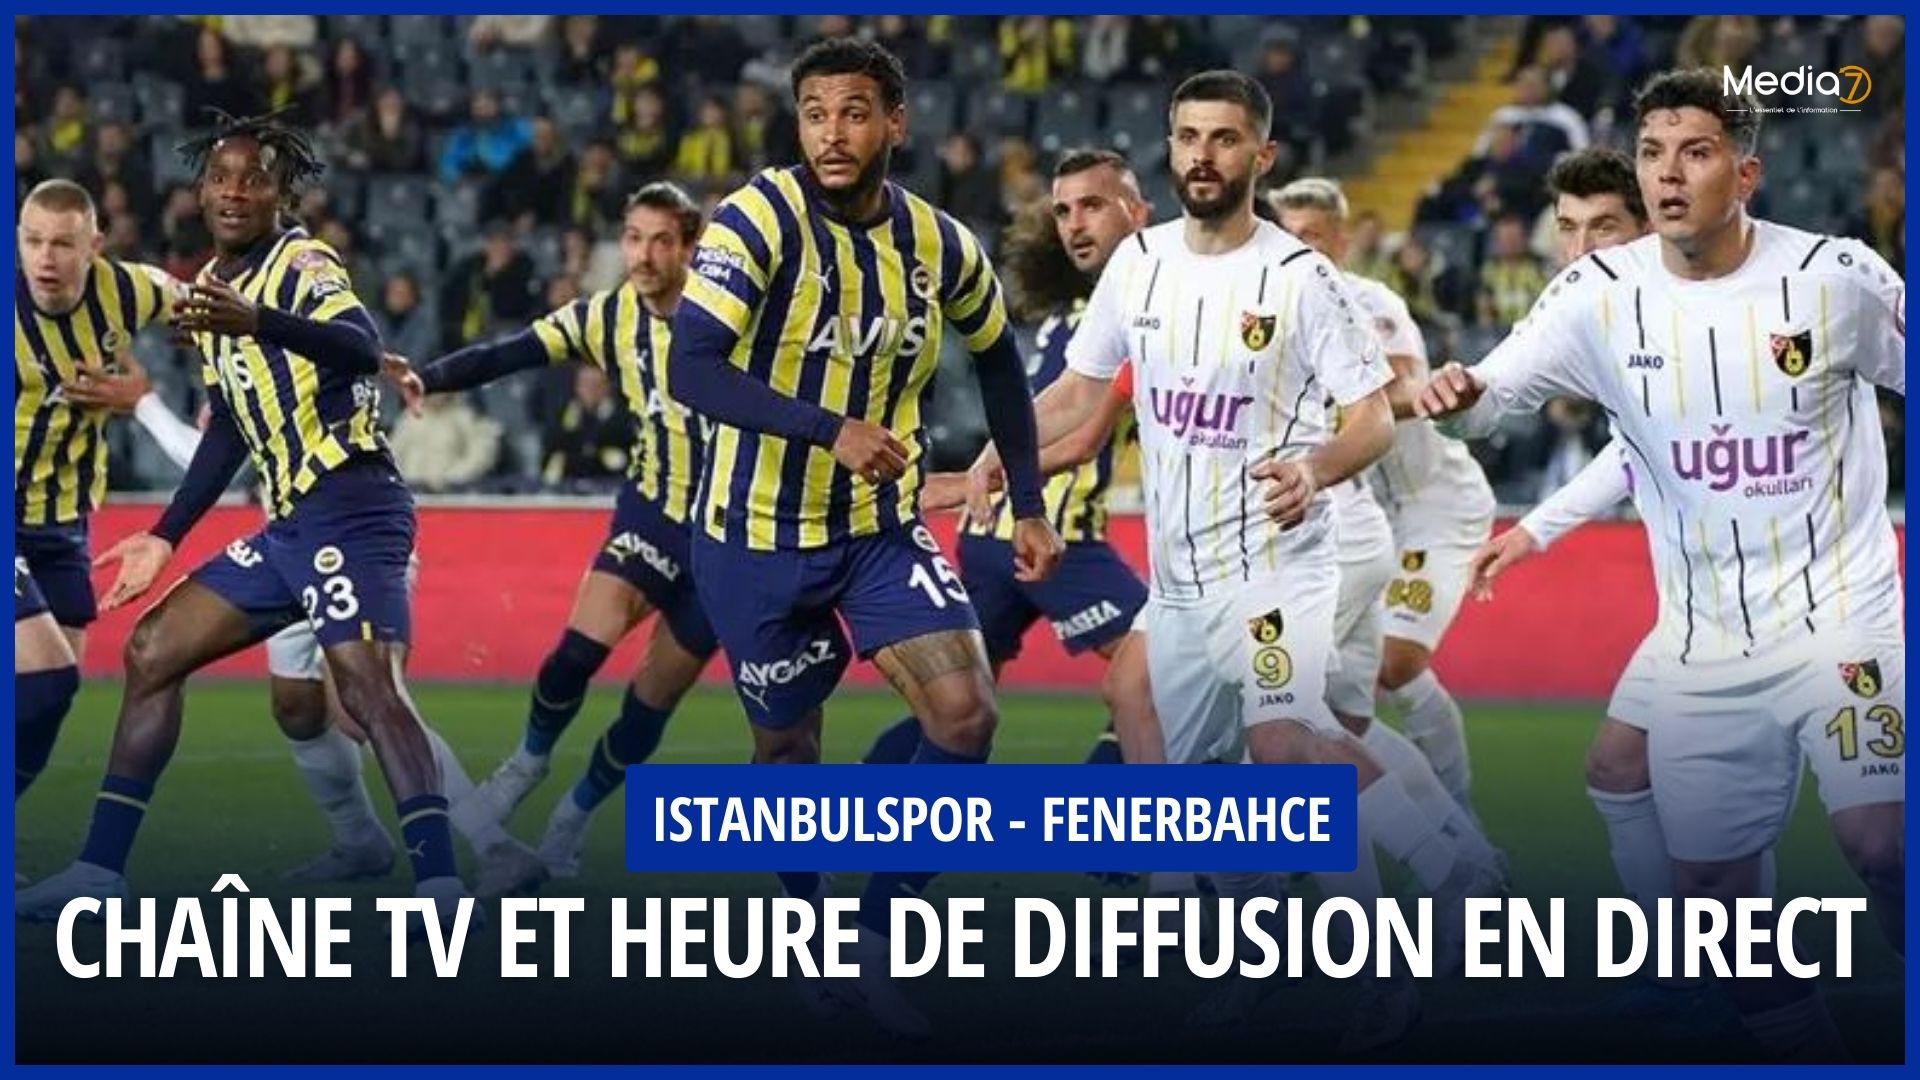 Match Istanbulspor - Fenerbahce Live: TV Channel and Broadcast Time - Media7